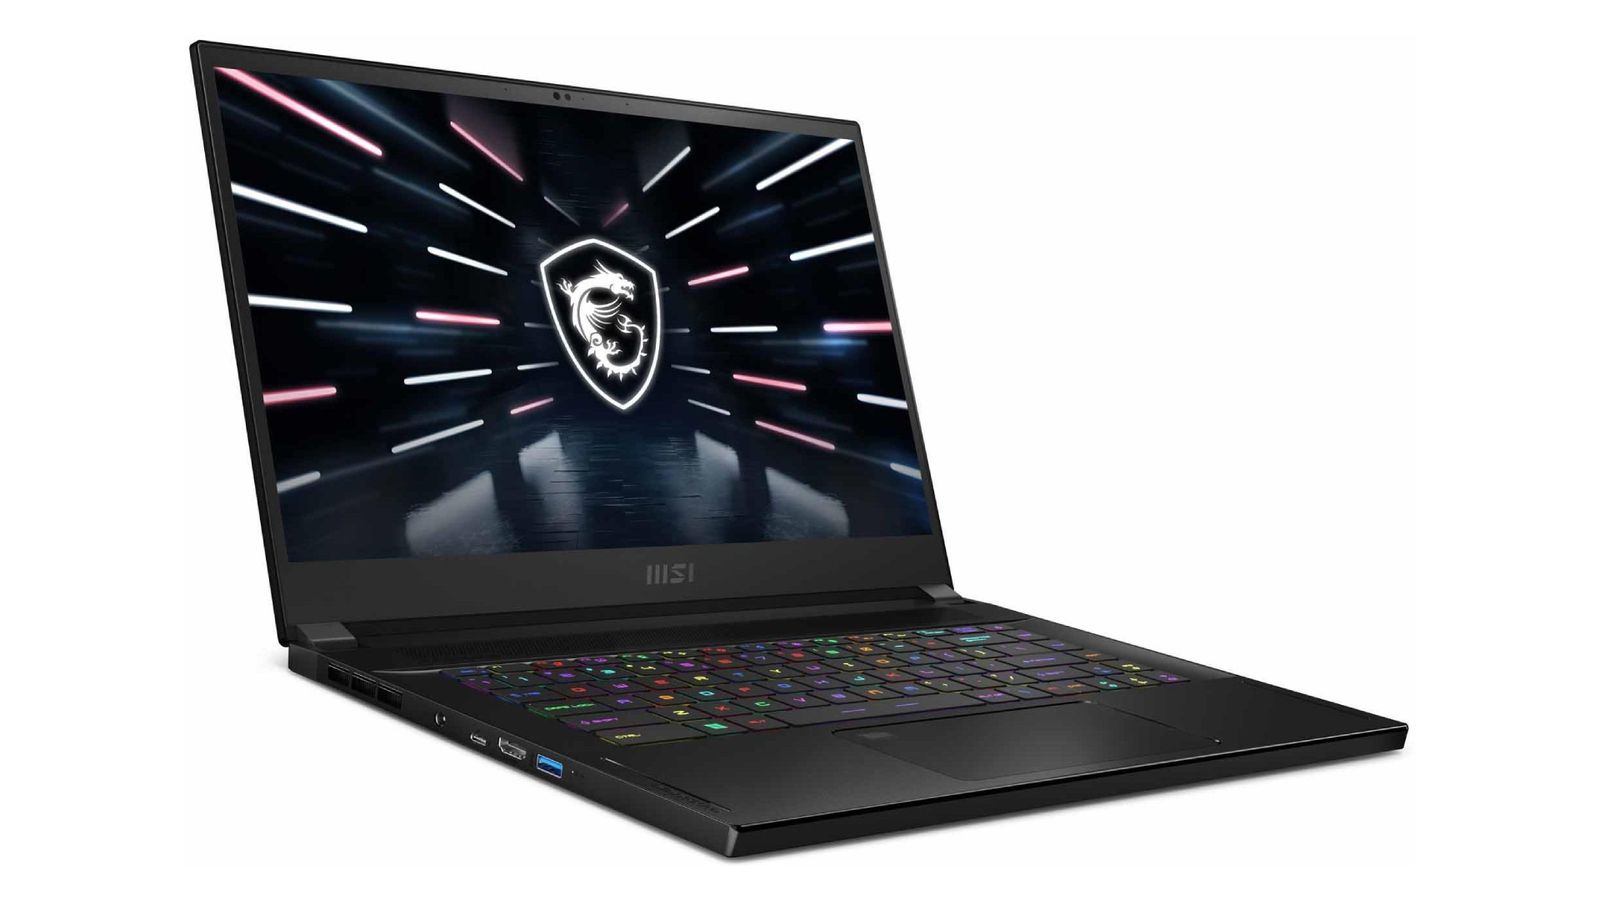 Best Resident Evil 4 gaming laptop - MSI Stealth GS66 product image of a black gaming laptop featuring multi-coloured backlit keys and MSI branding on the display in white.